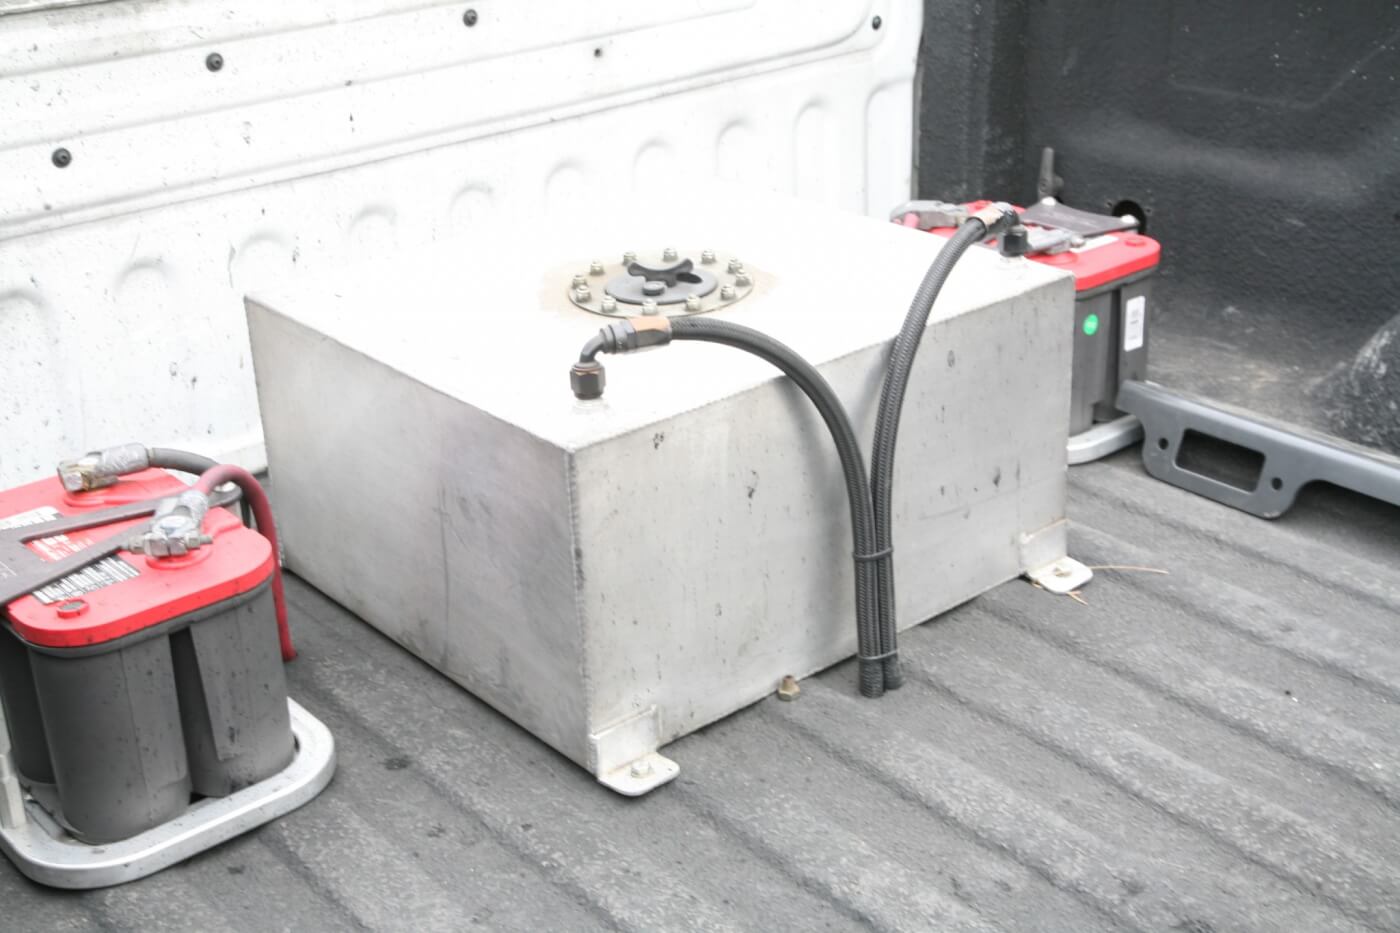 A fuel cell and dual Optima Red Top batteries are mounted in the bed.